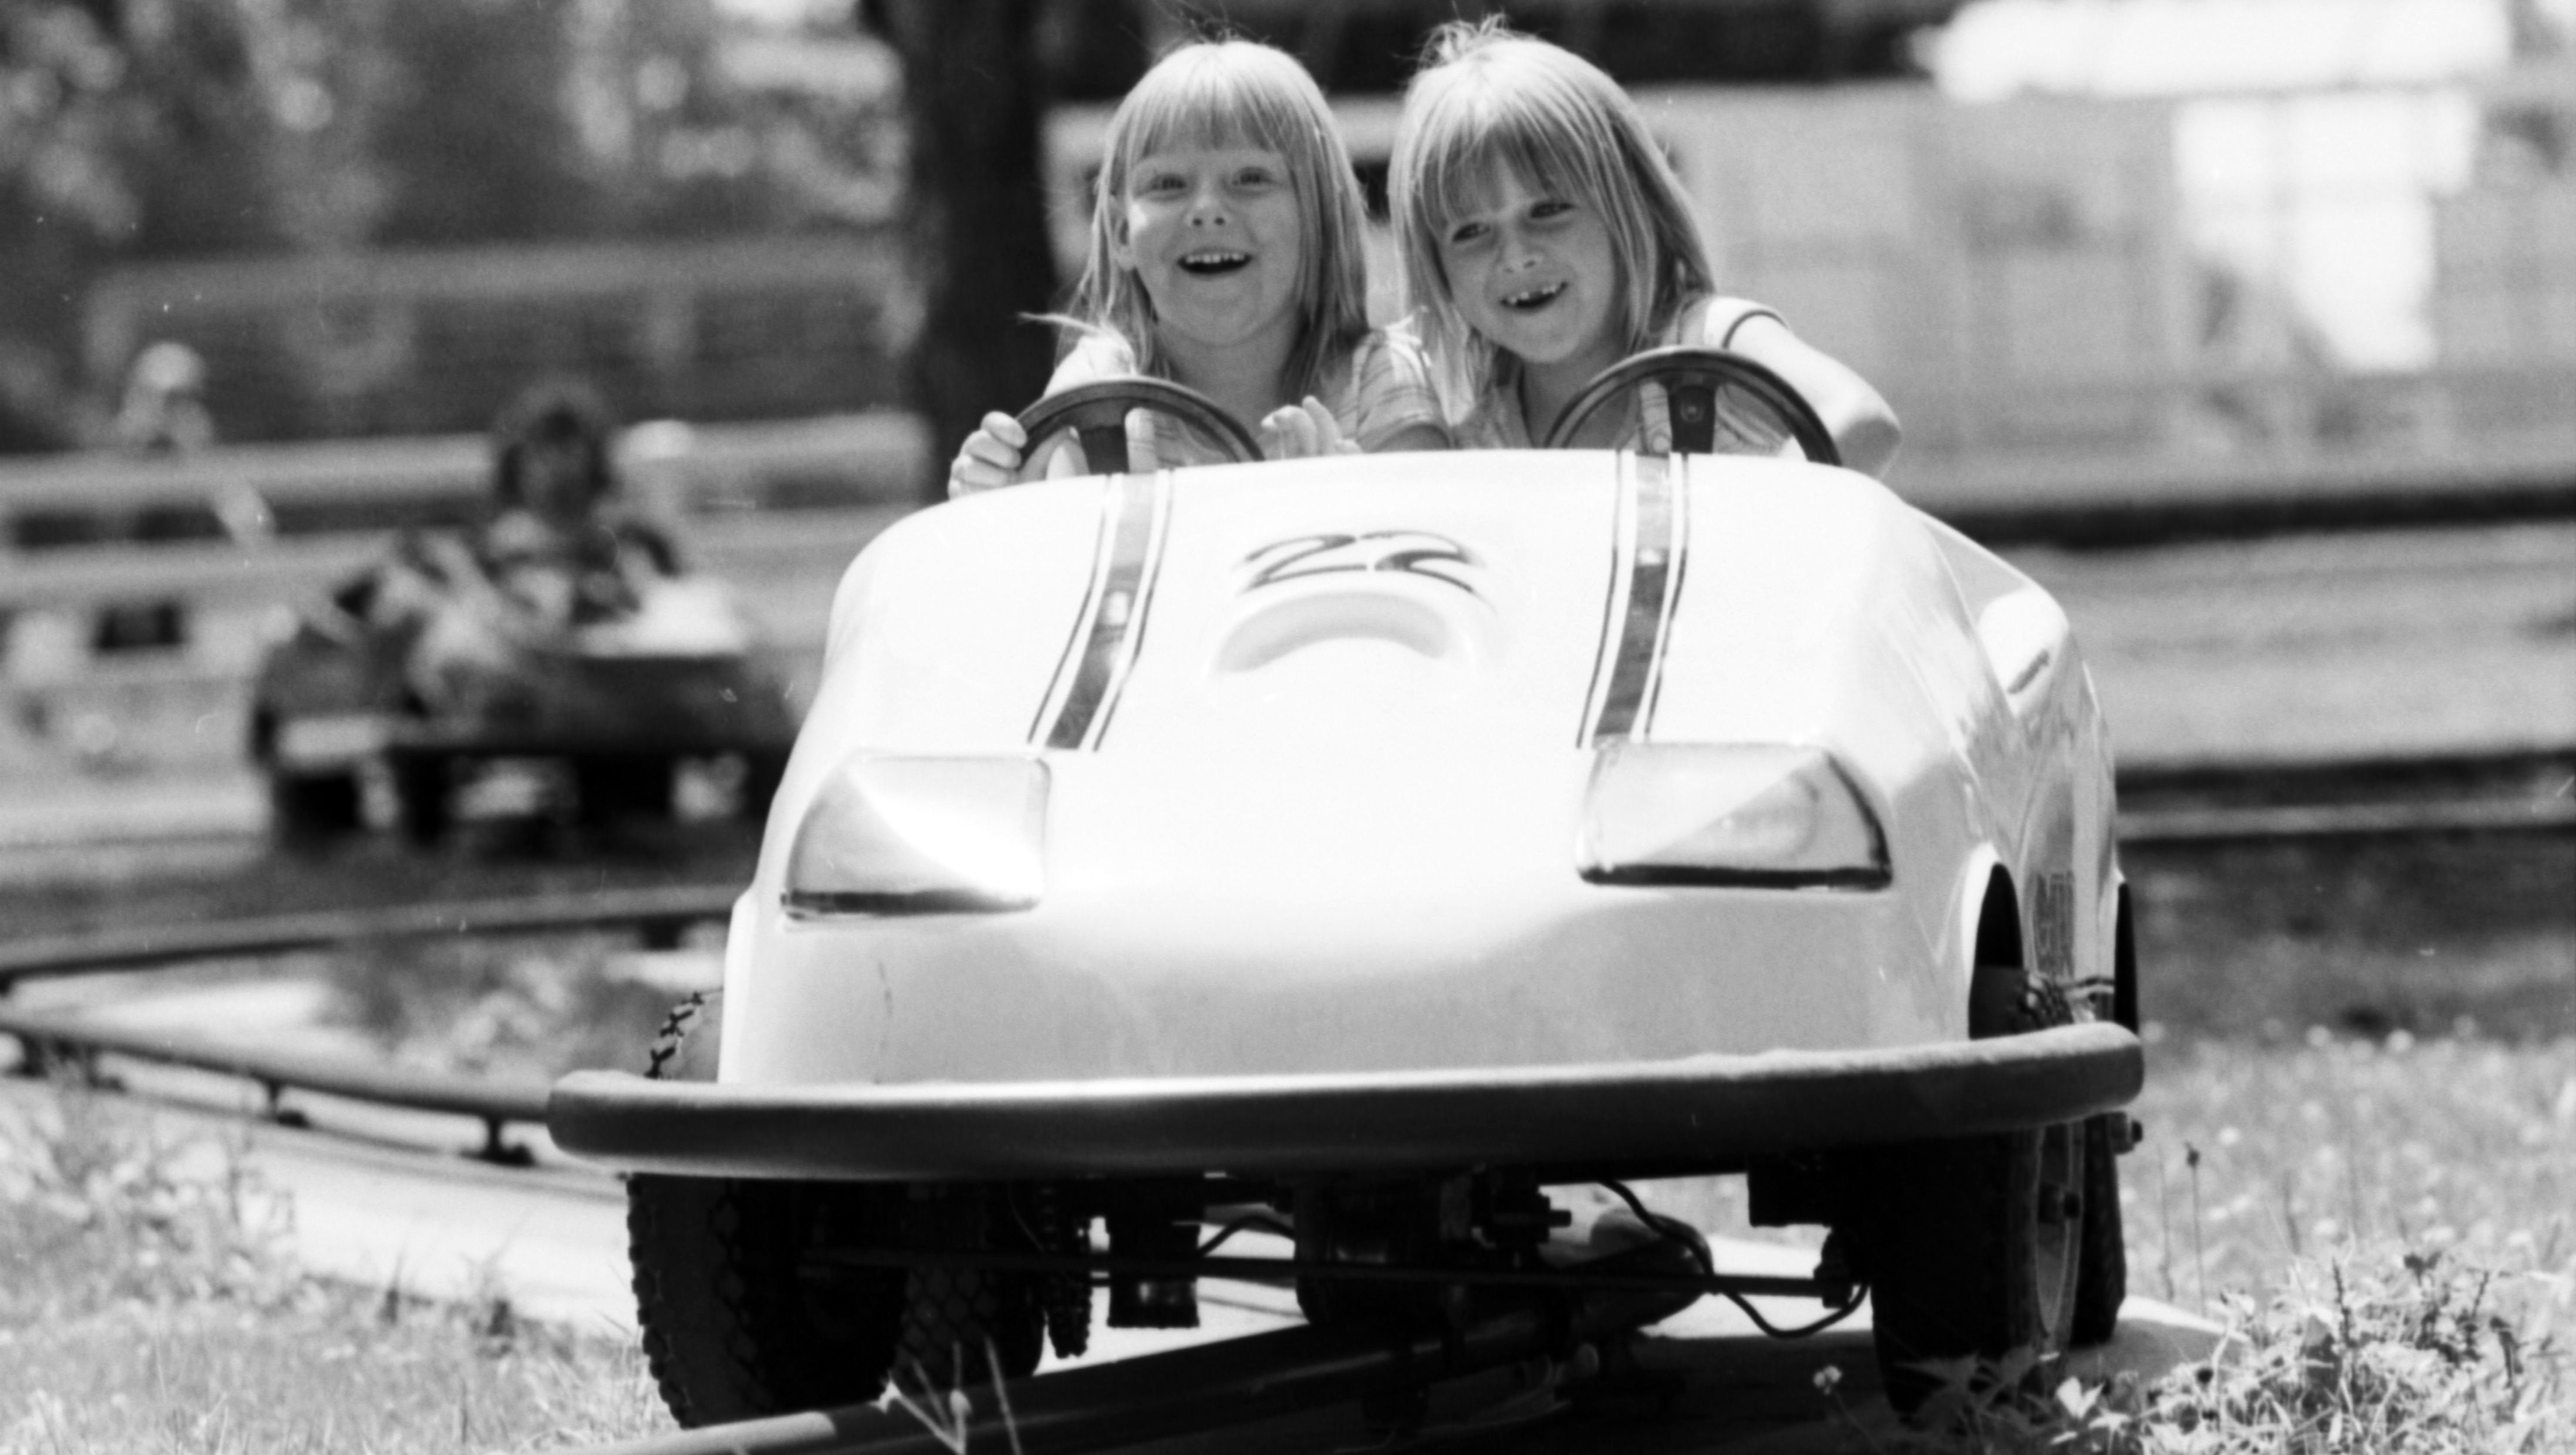 Two young  girls enjoy one of the Boblo rides in 1981.